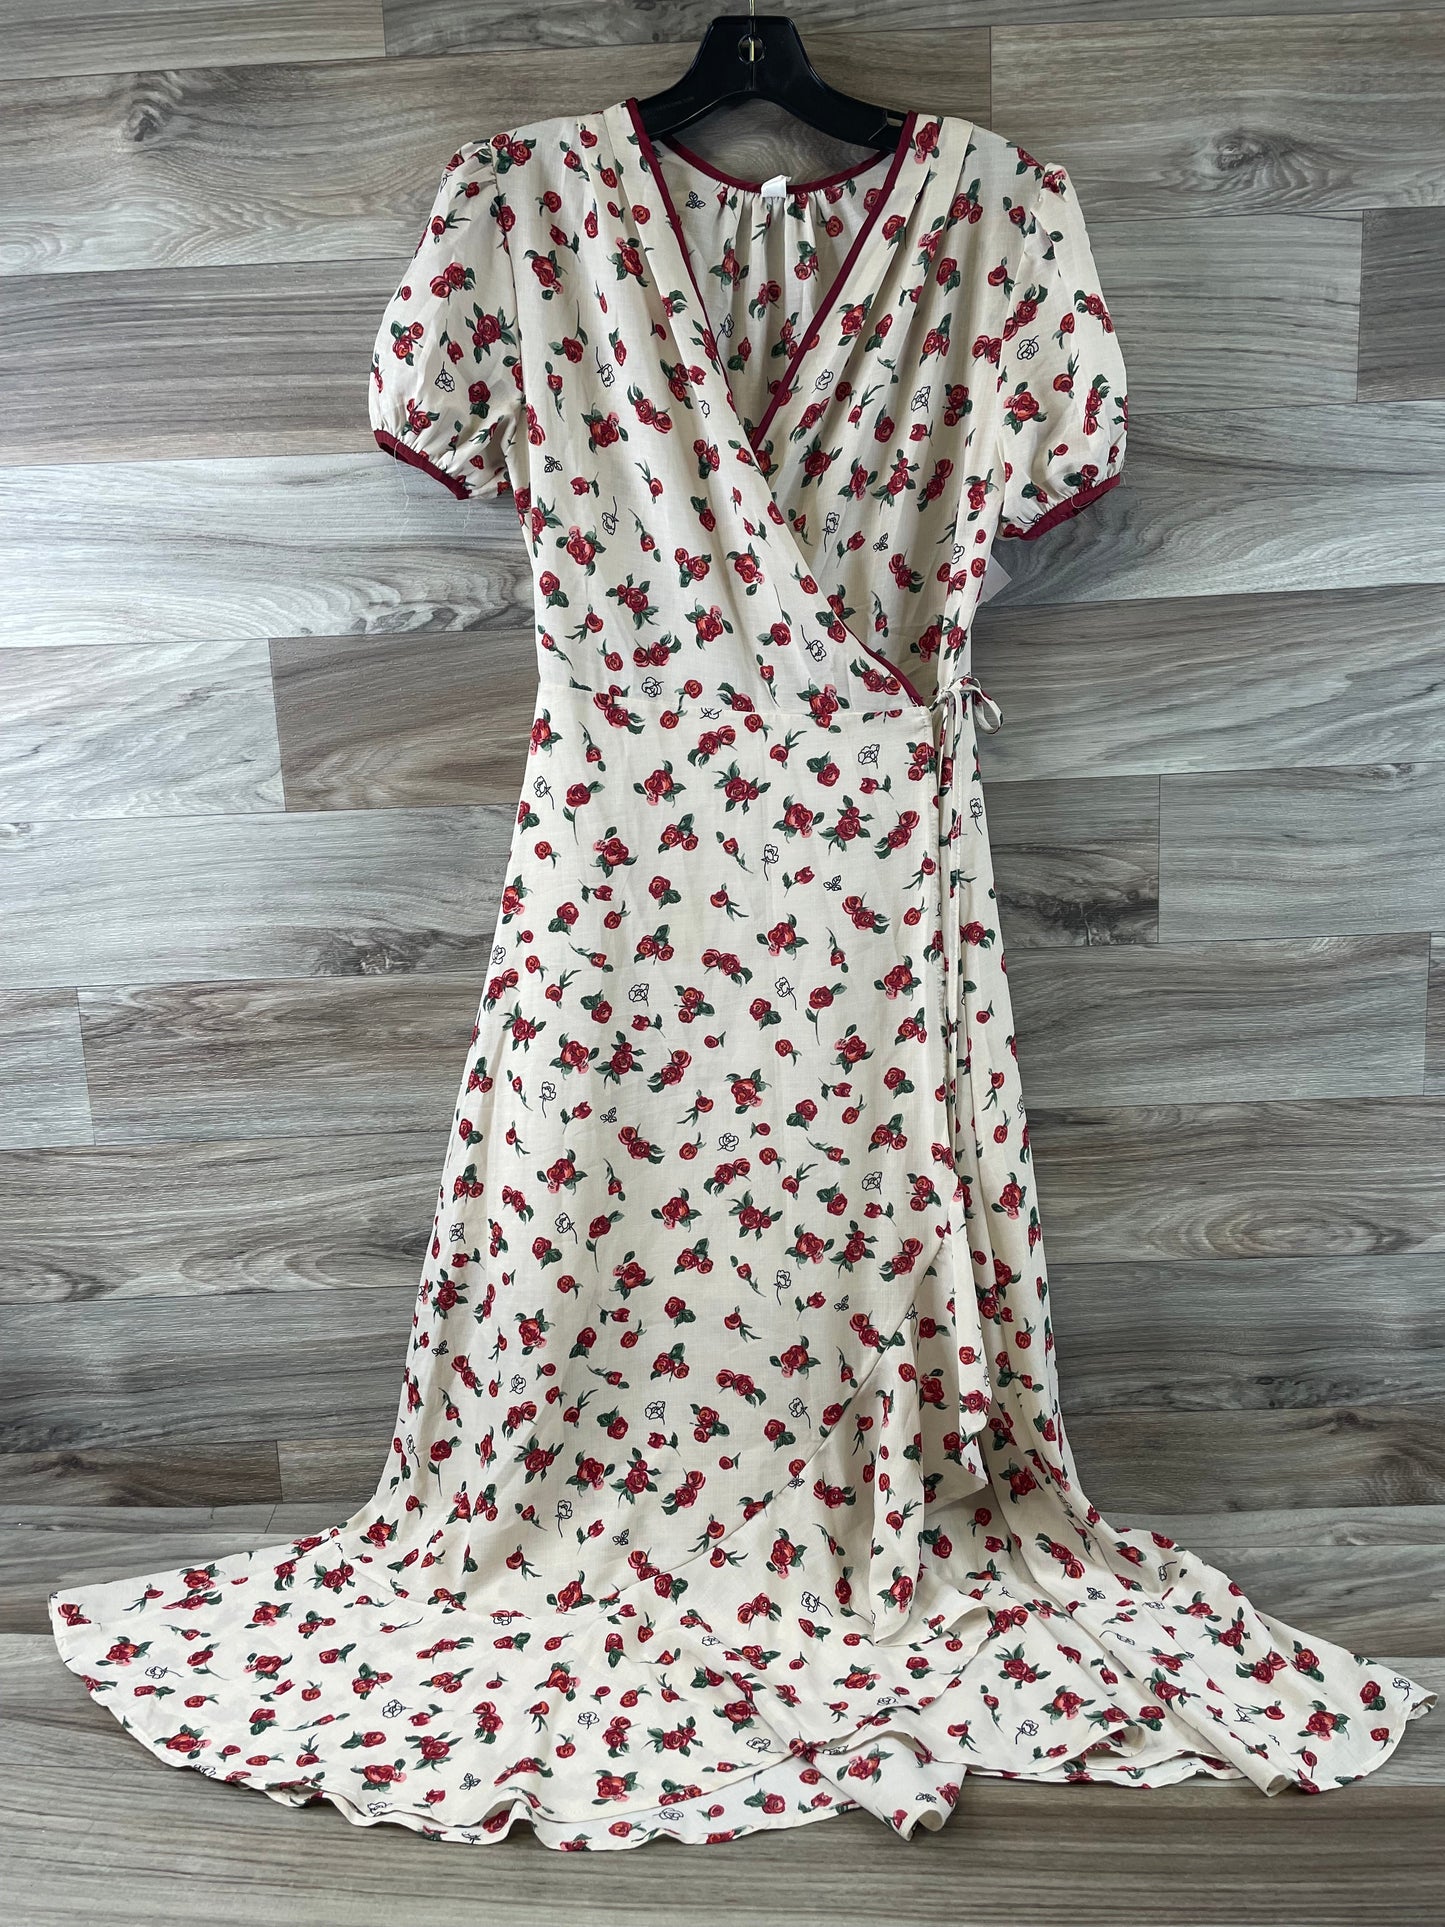 Cream & Red Dress Casual Maxi Clothes Mentor, Size S